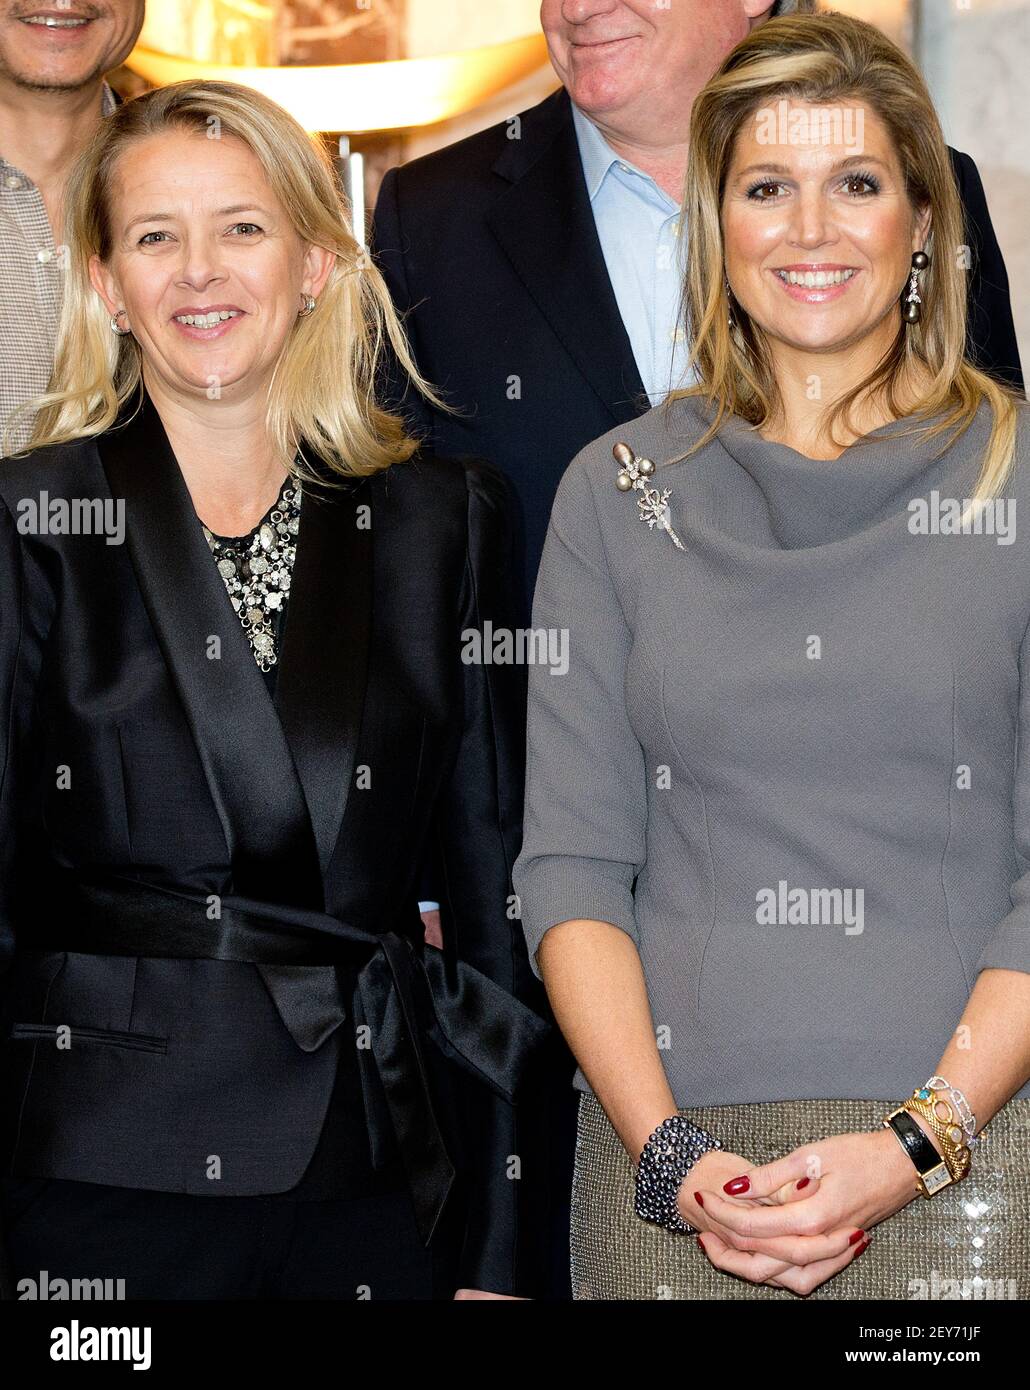 10-12-2014 AMSTERDAM - Queen Maxima and Princess Mabel attend the award ceremony of the Prince Claus Prize 2014 to Columbian artist and plant expert Abel RodrÃguez at the Royal Palace in Amsterdam (Photo by Robin Utrecht/Sipa USA) Stock Photo